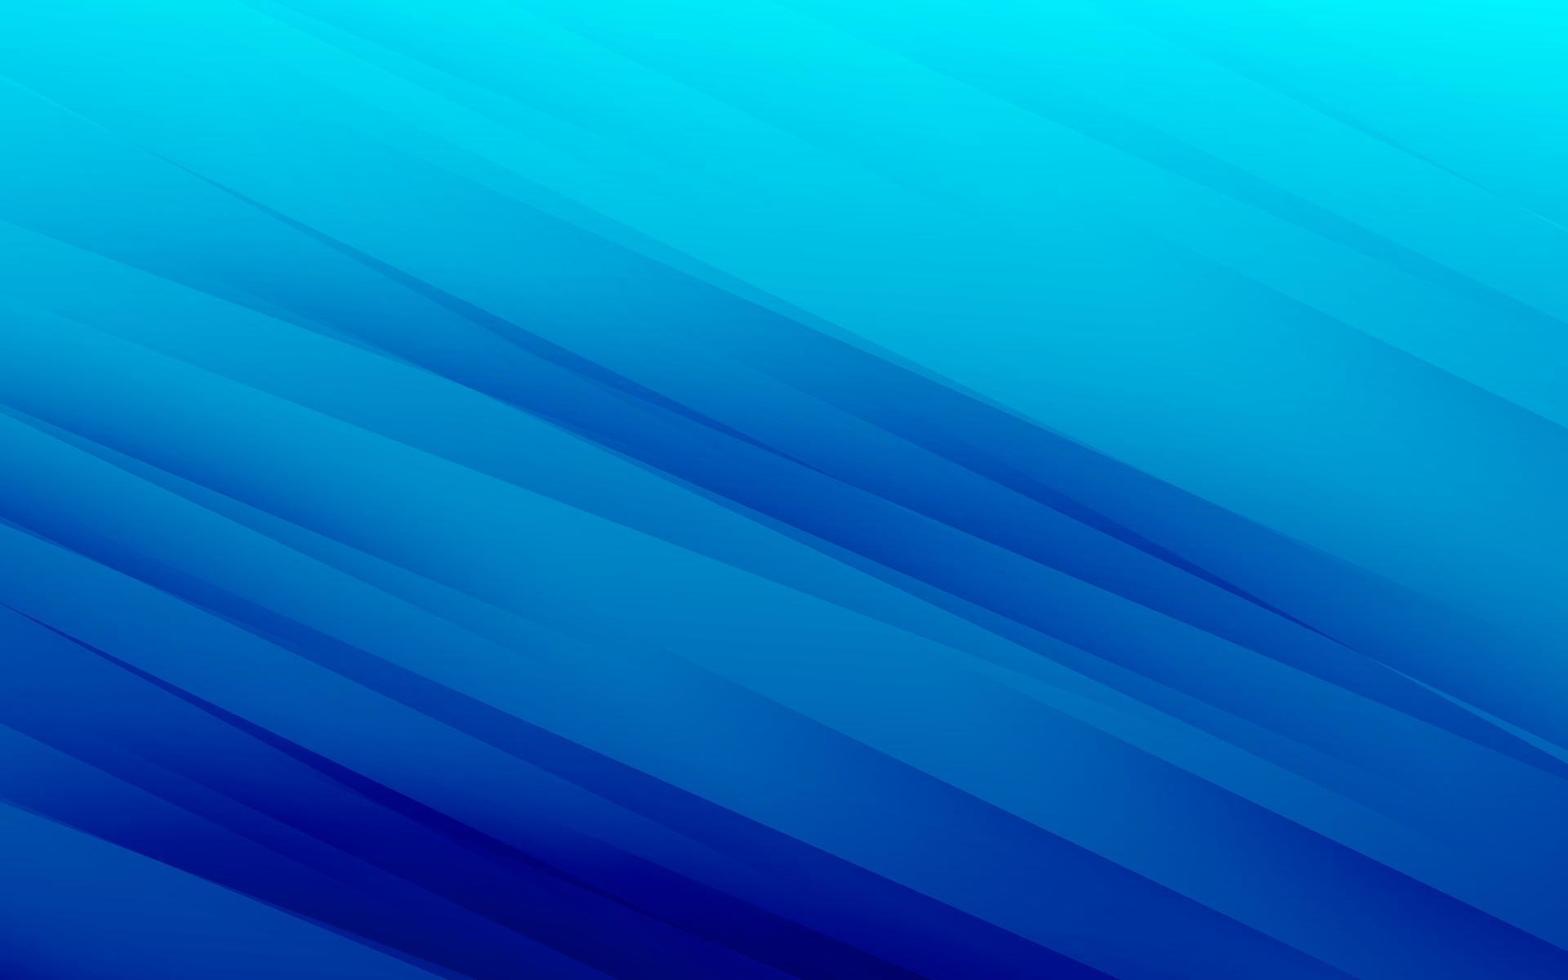 Abstract paper blue light background vector